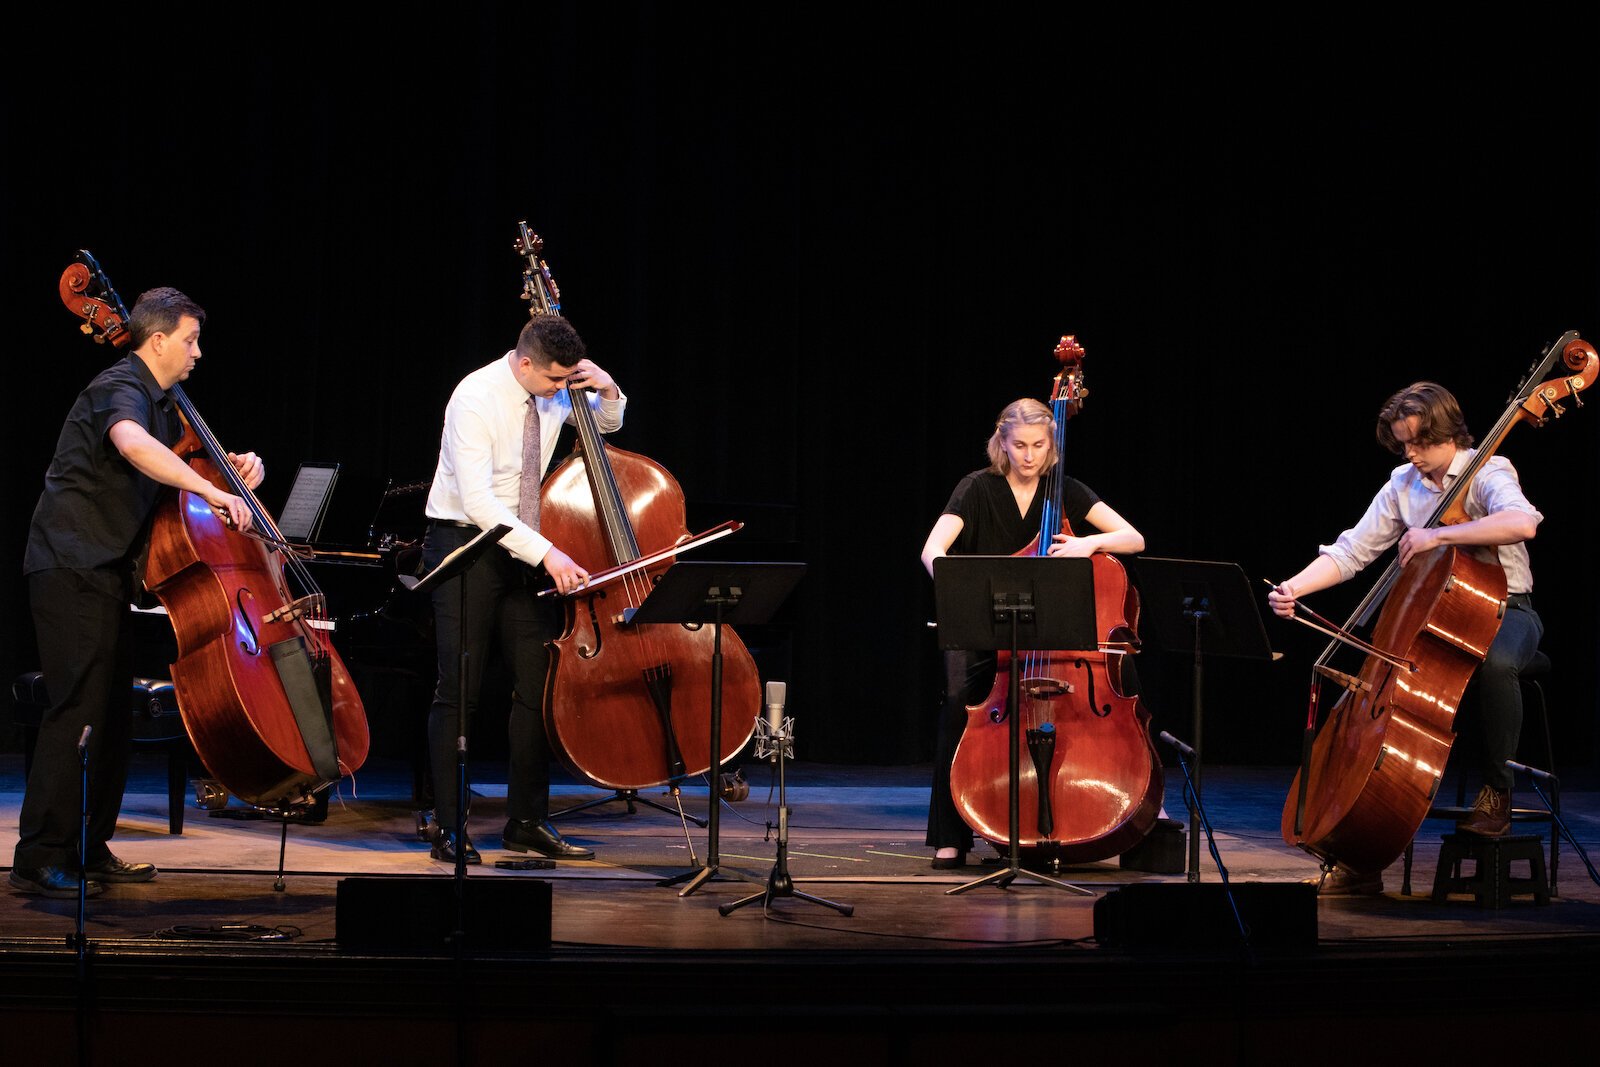 The Honeywell Arts Academy is an expansion of the Wabass Institute, a music program established in 2008 for double bassists.